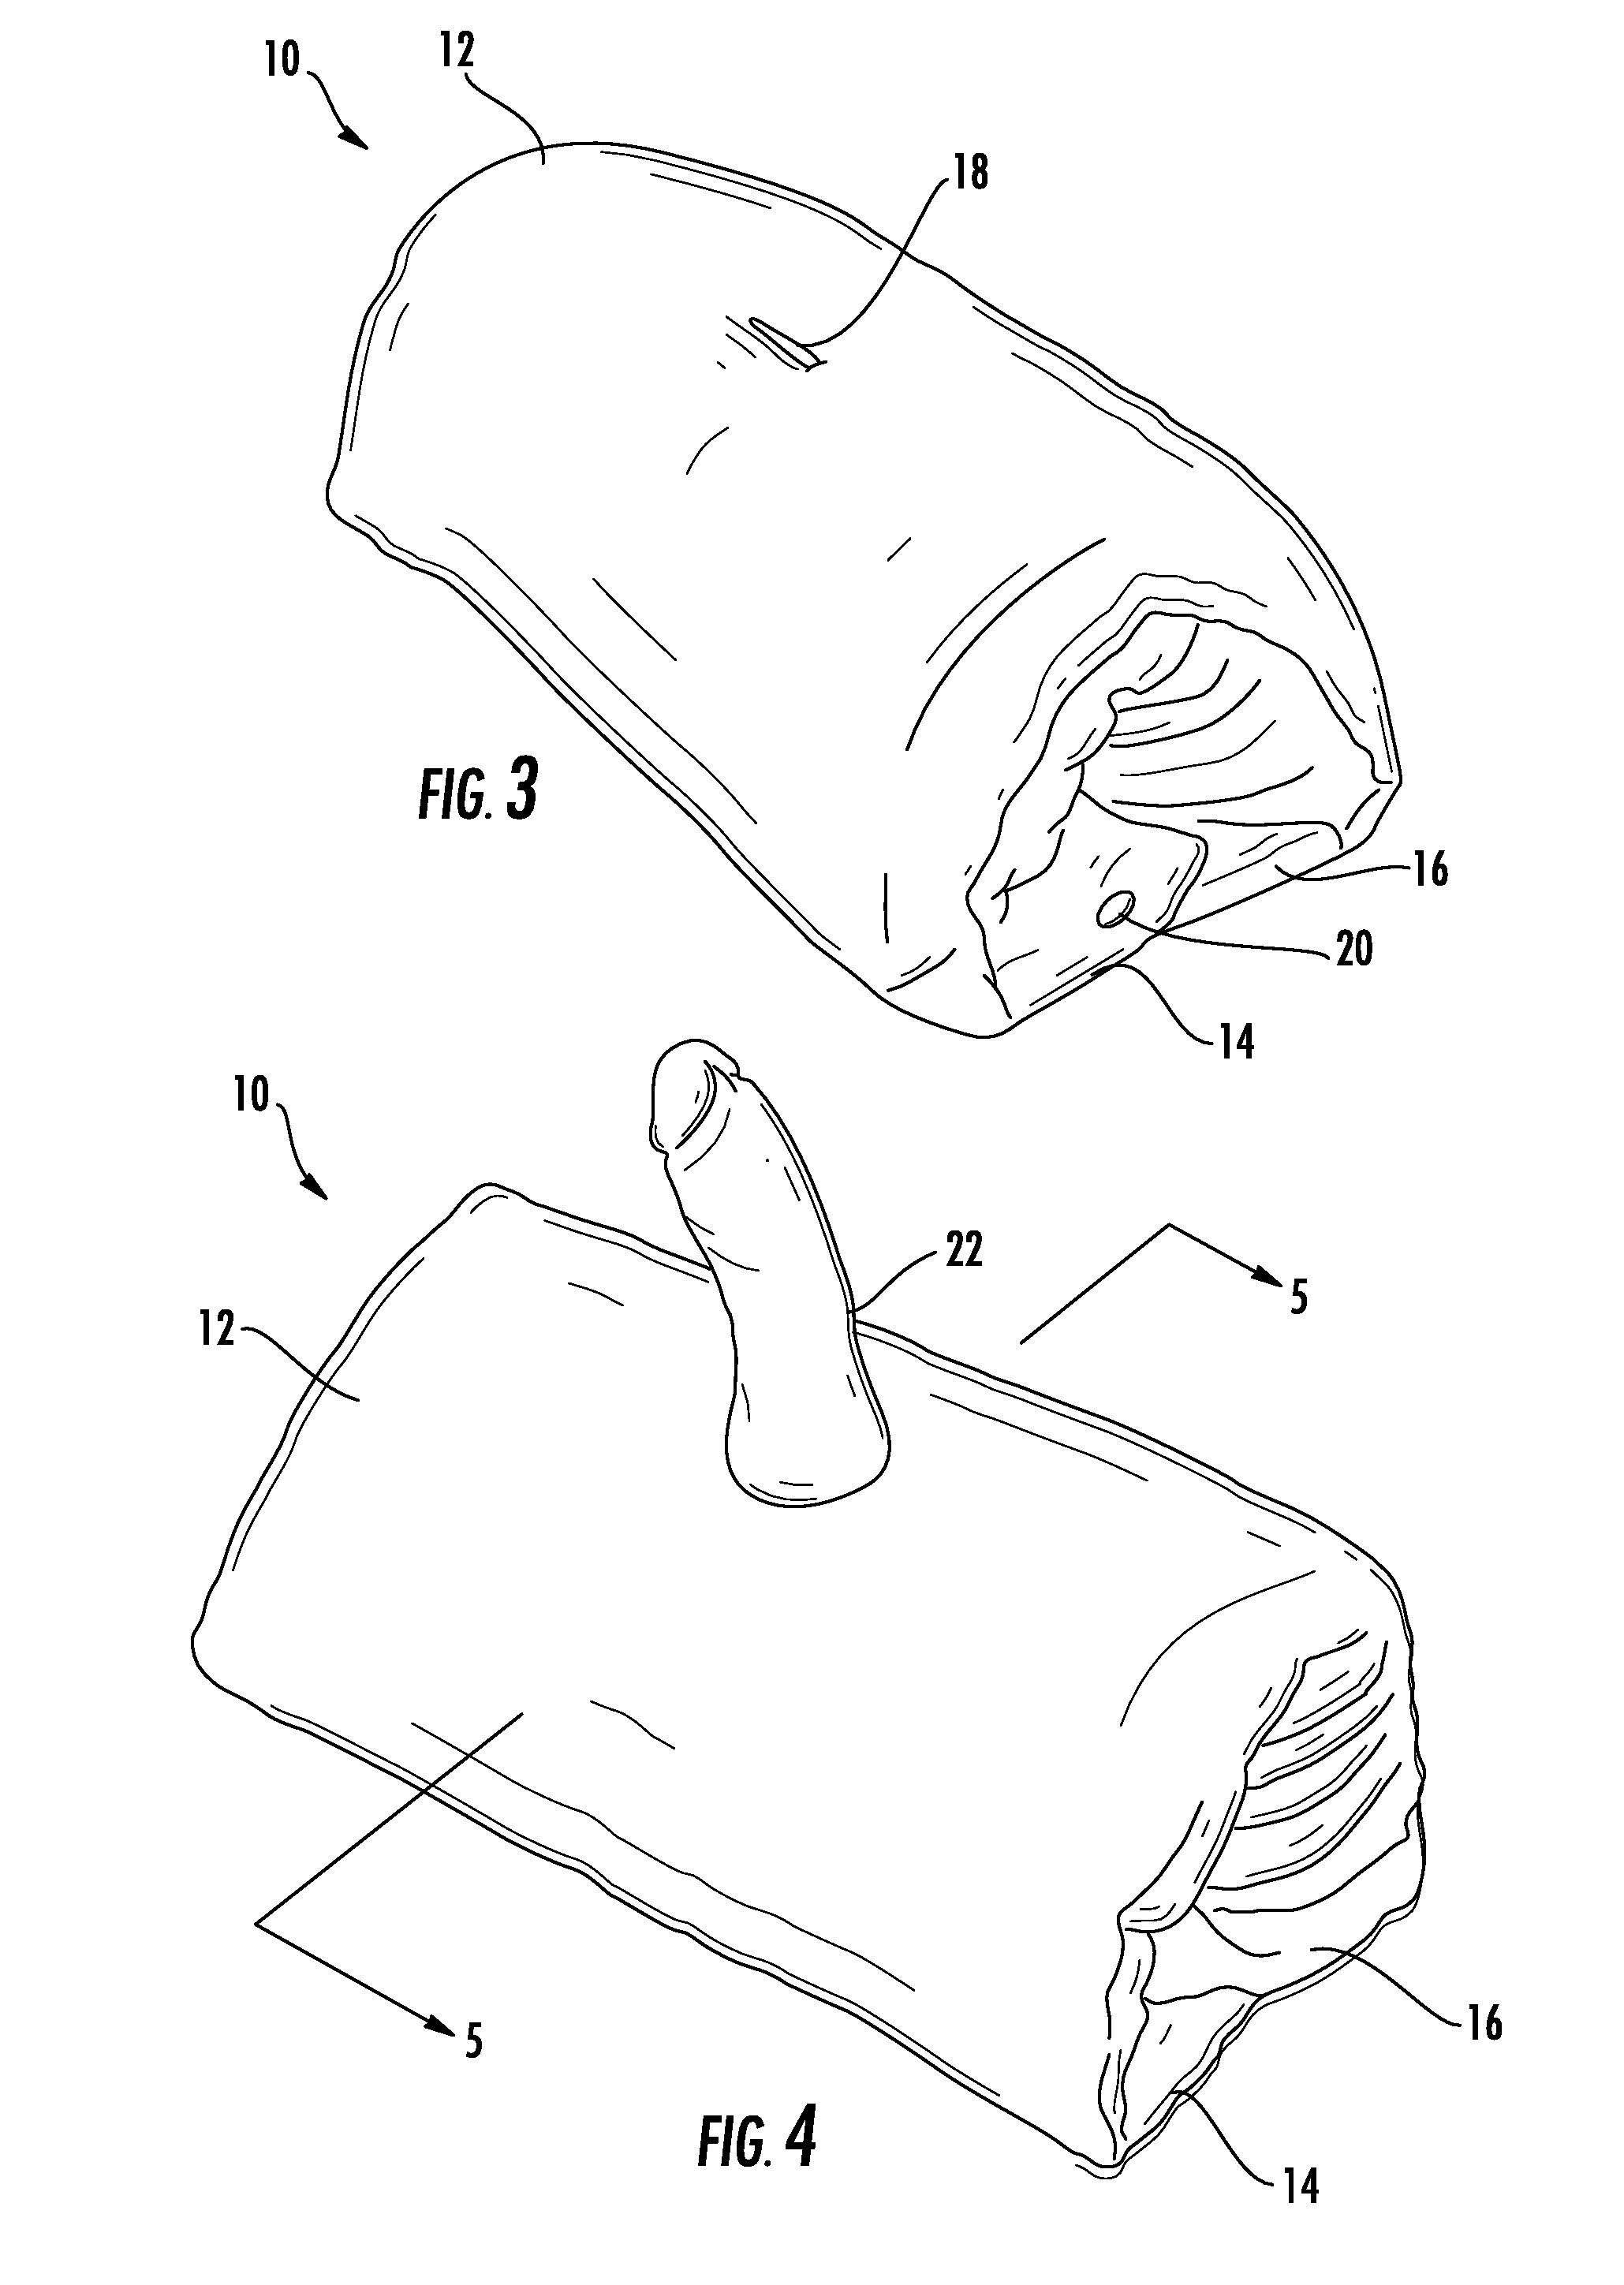 Cushion for use with sexual stimulation devices